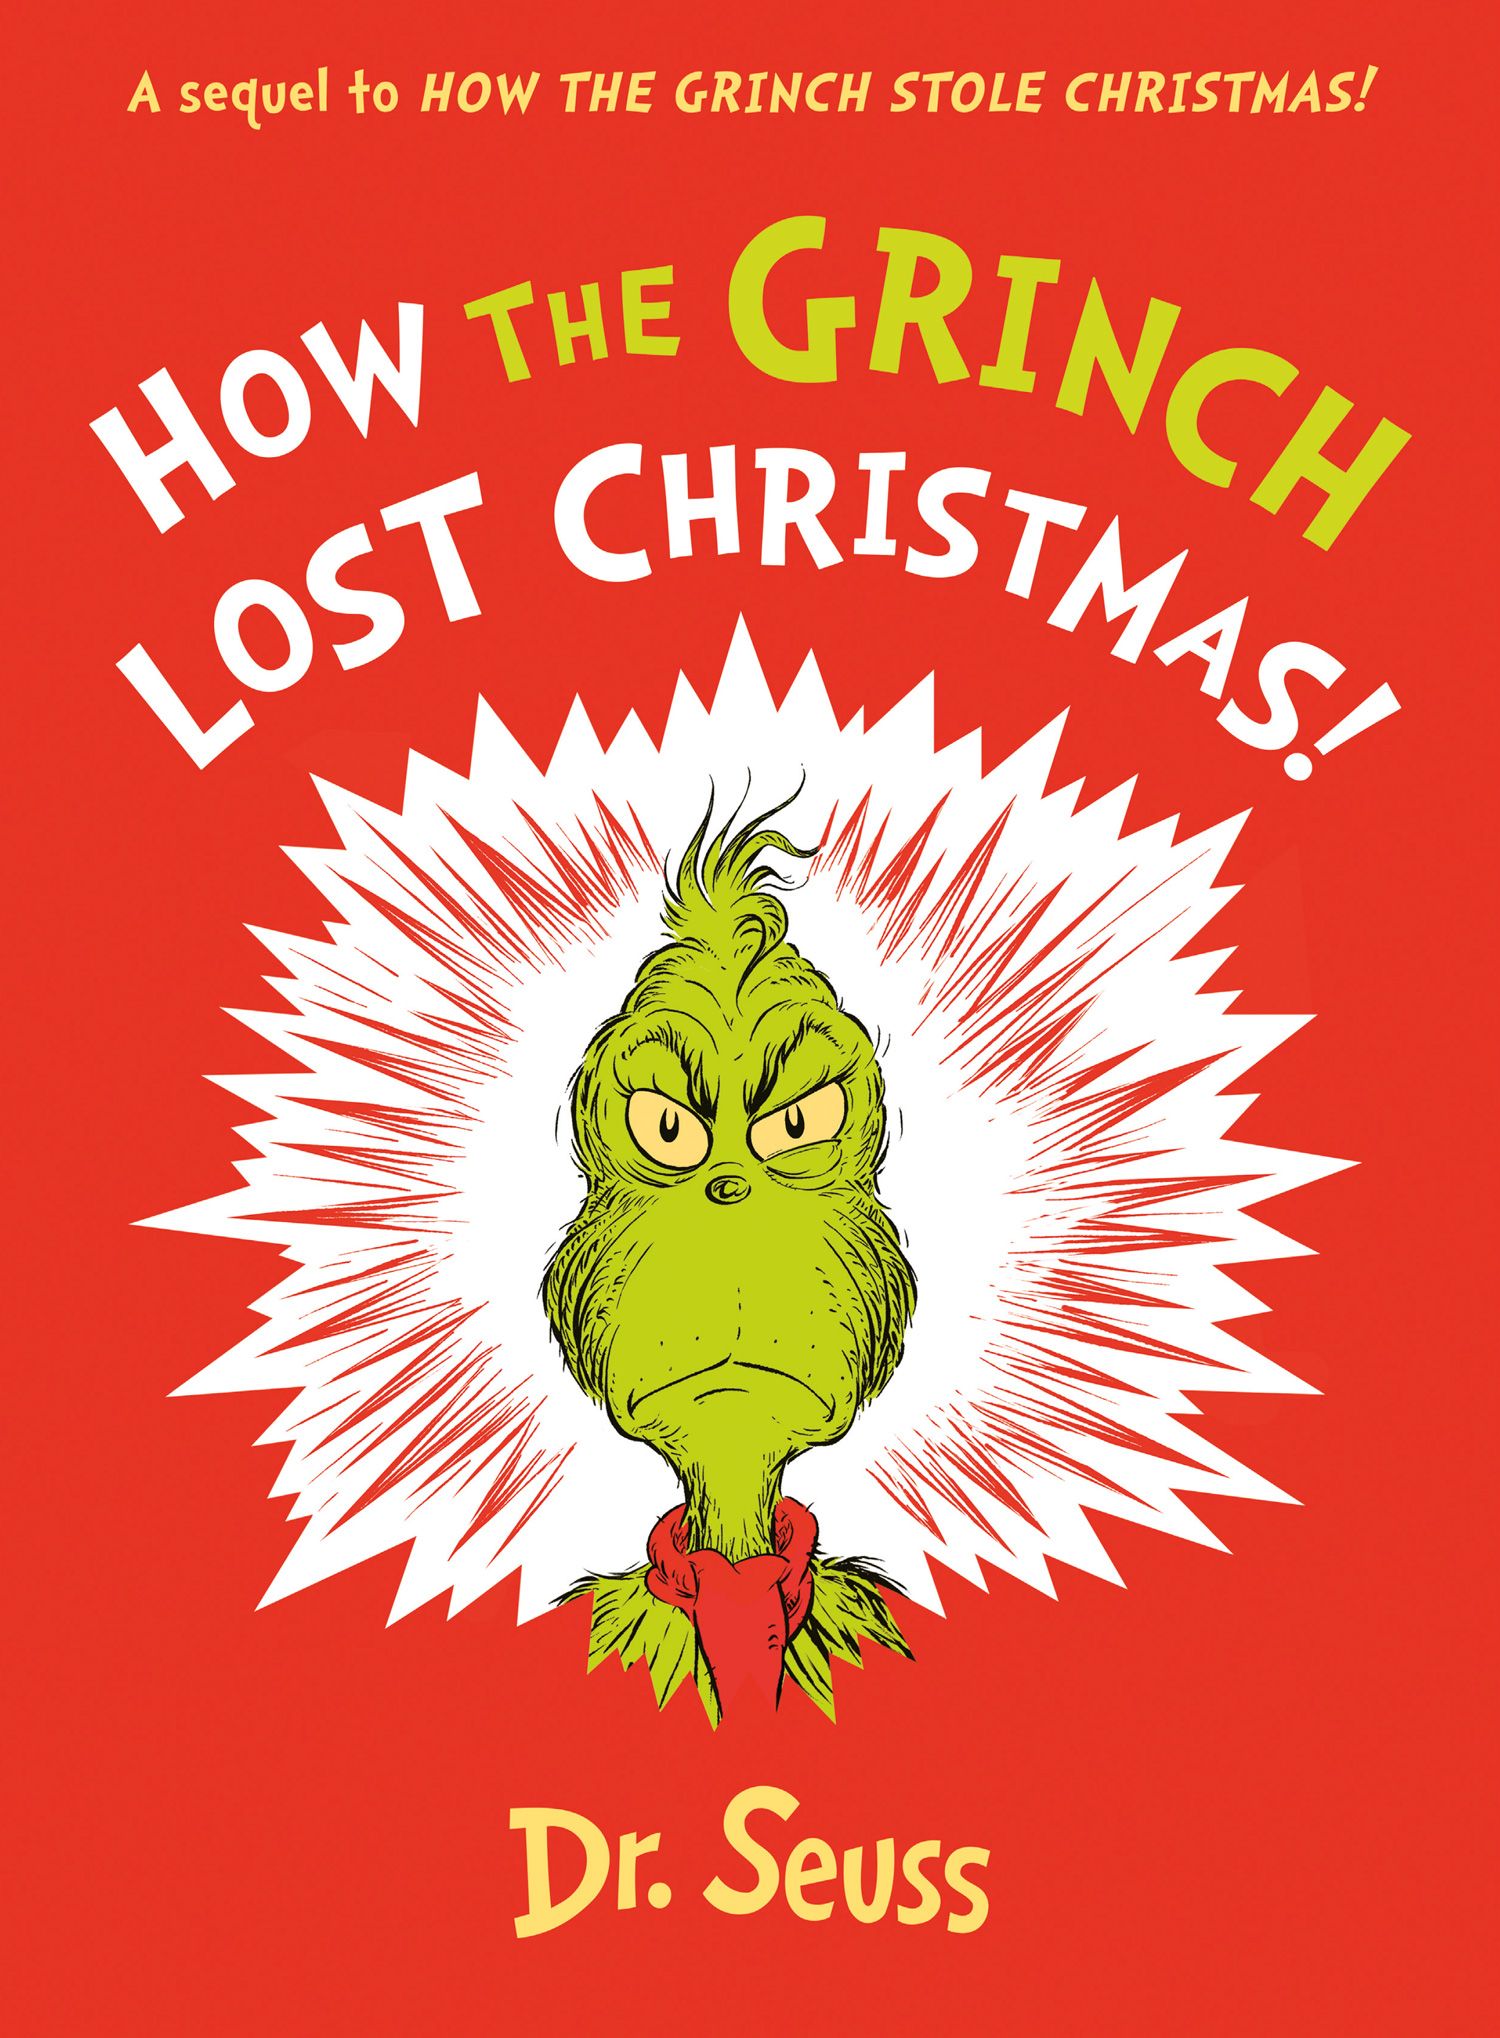 How the Grinch Lost Christmas! A sequel to How the Grinch Stole